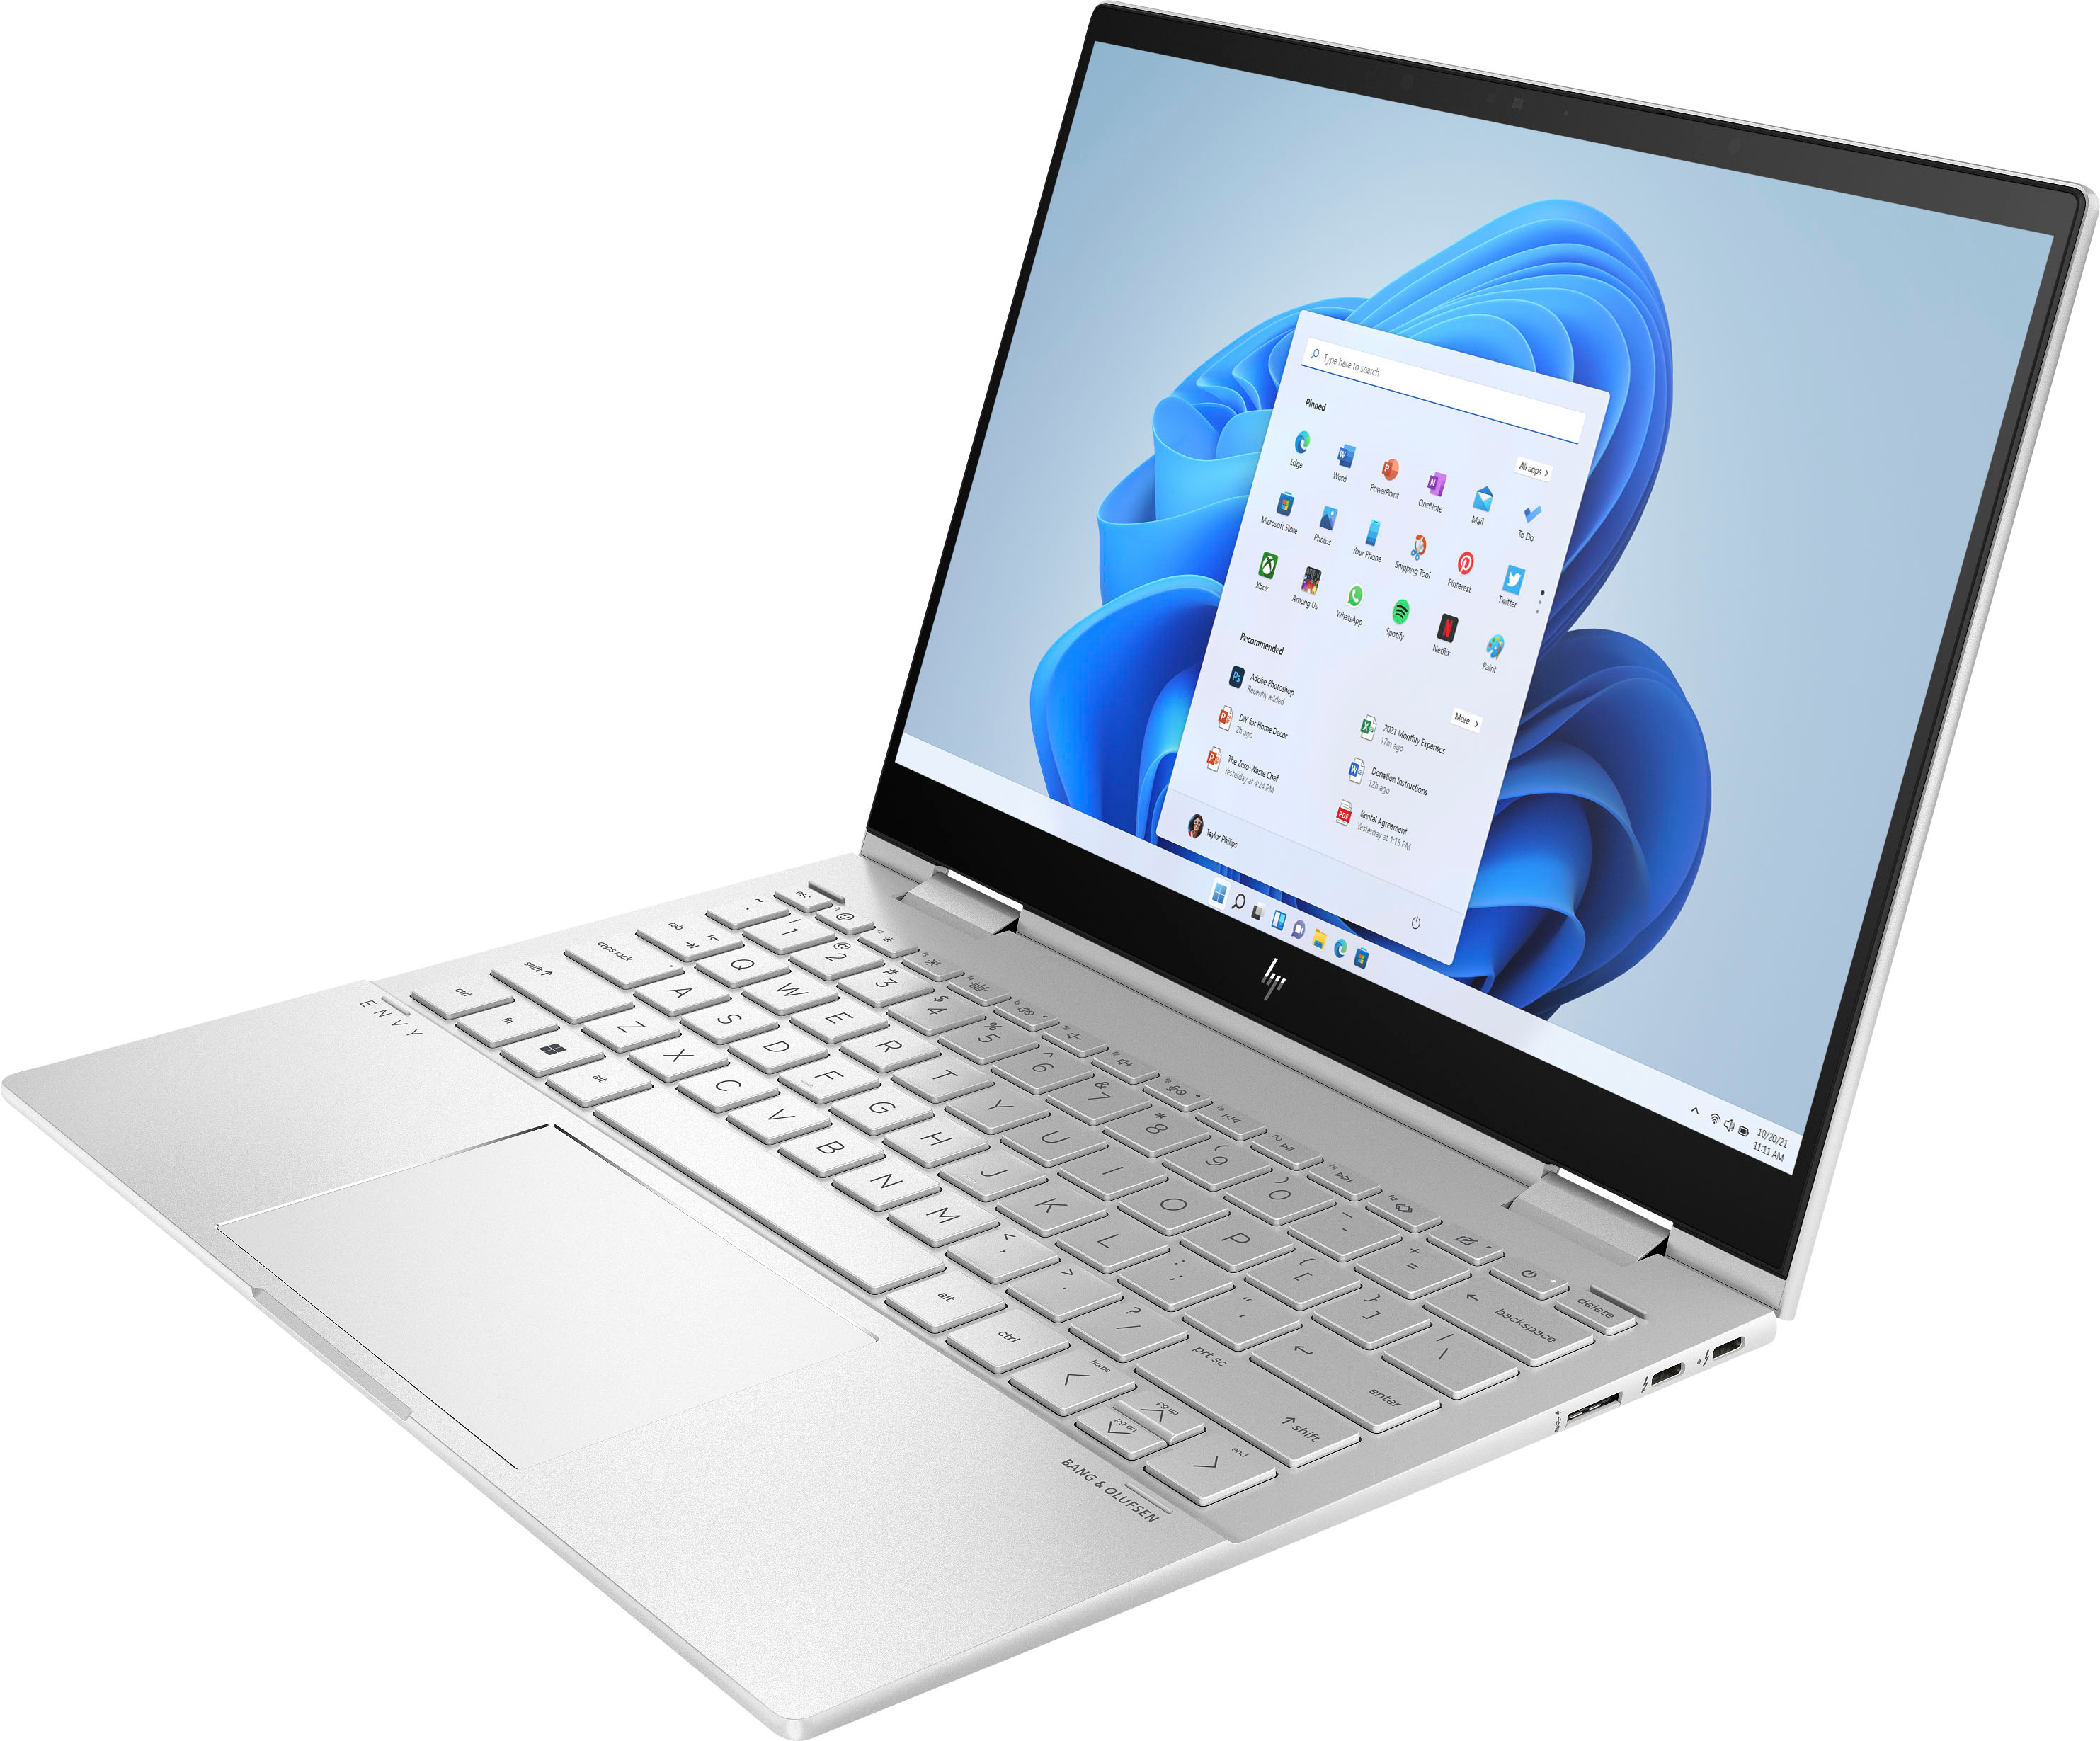 HP - ENVY 2-in-1 13.3" Touch-Screen Laptop - Intel Evo Platform - Core i7 - 8GB Memory - 512GB SSD - Natural Silver